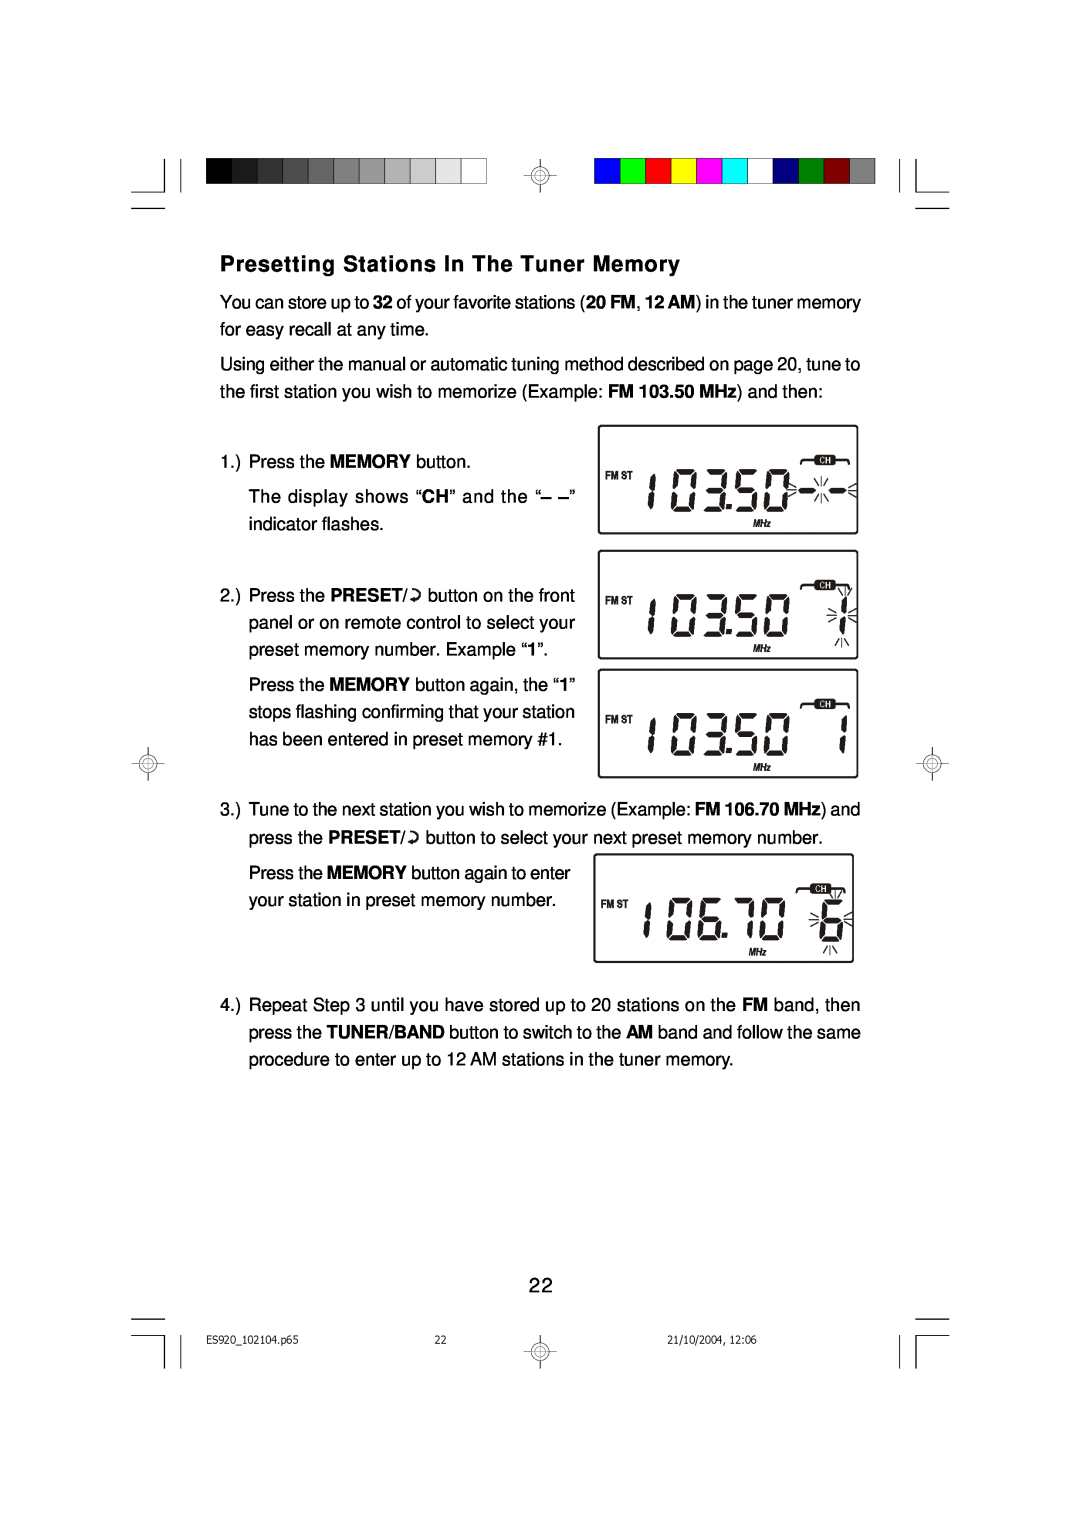 Emerson ES920 owner manual Presetting Stations In The Tuner Memory 